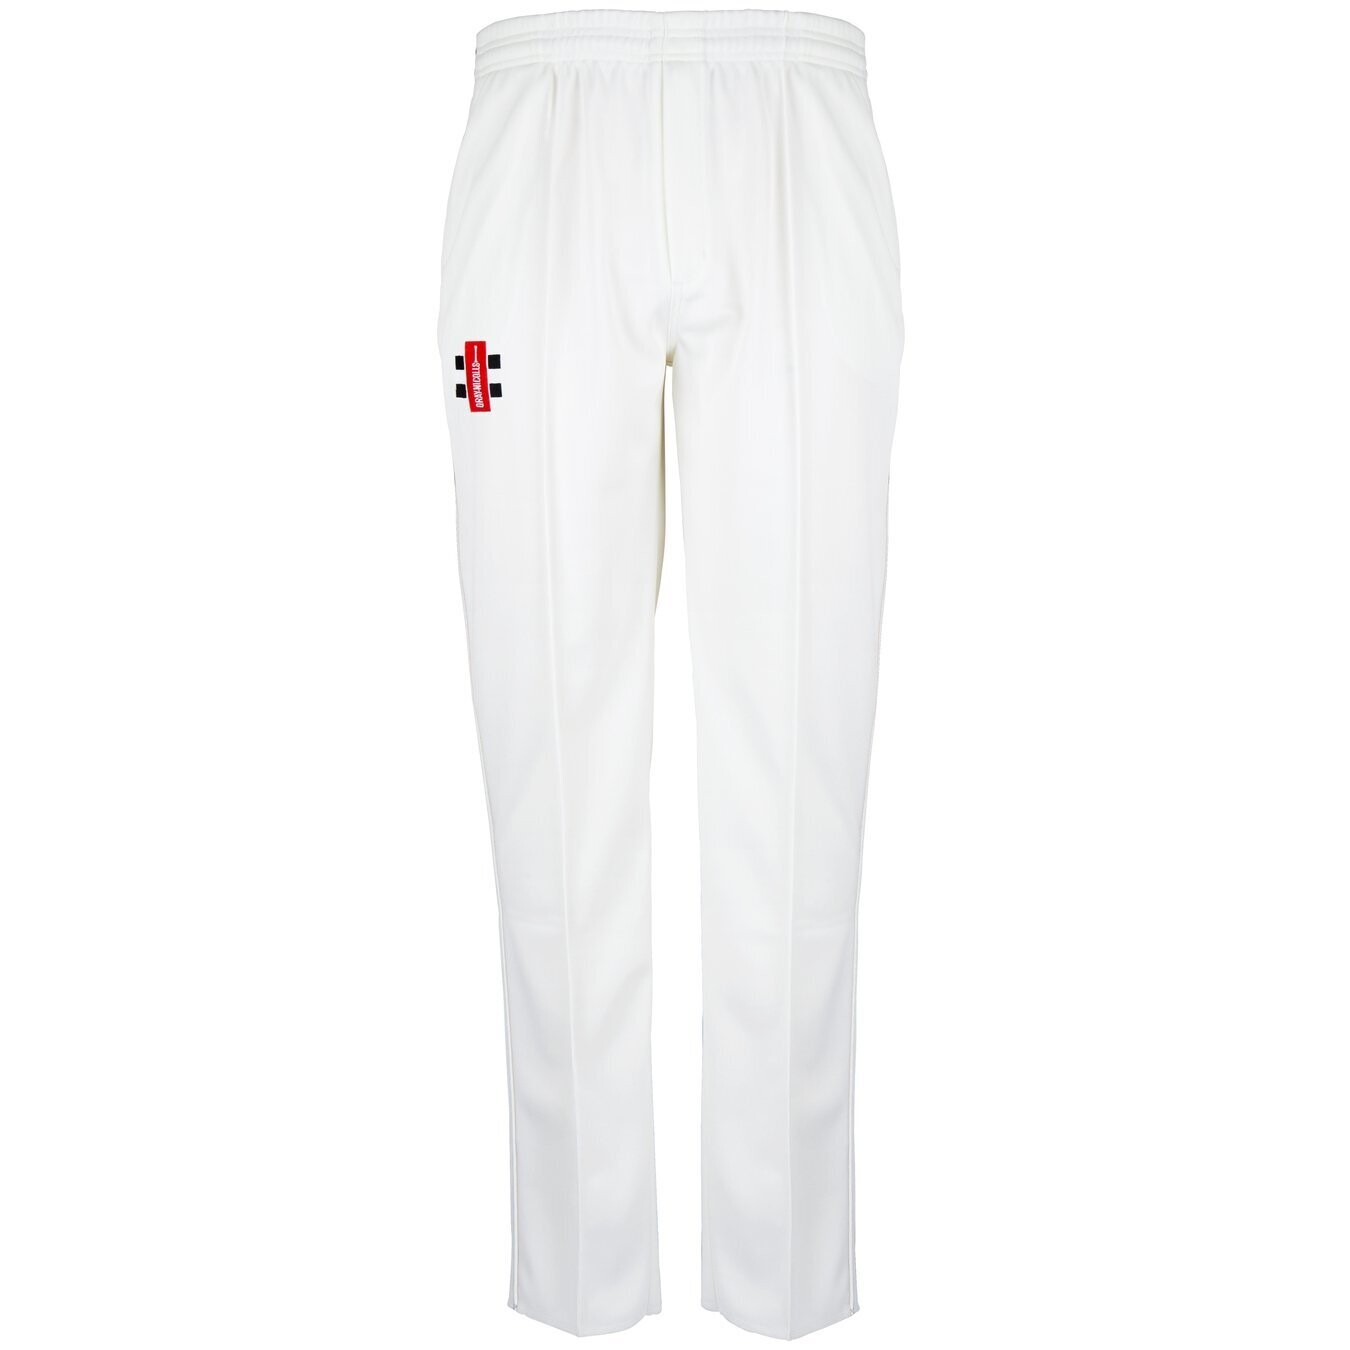 Buy Cricket Clothing at Best Prices in AU  WesternSportsCentre  Western  Sports Centre